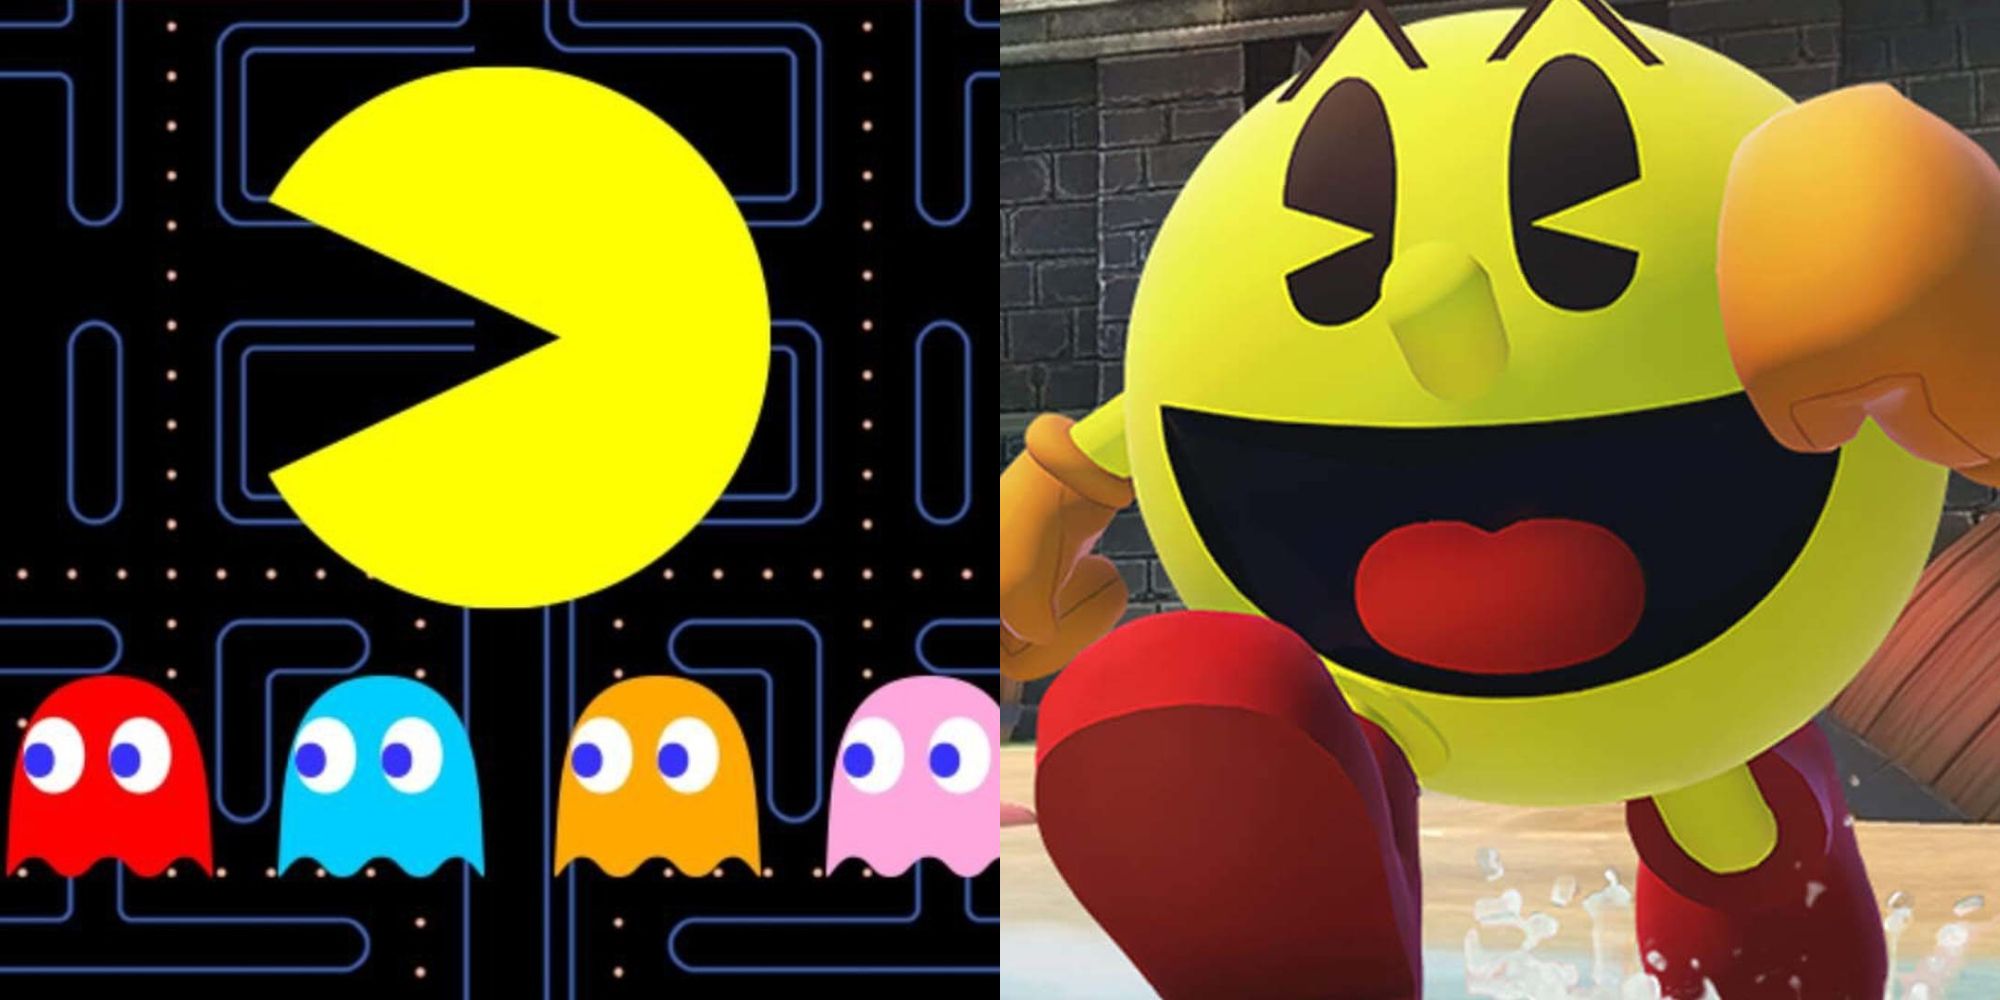 Split image showing Pac-Man in the arcade version and in Pac-Man World.